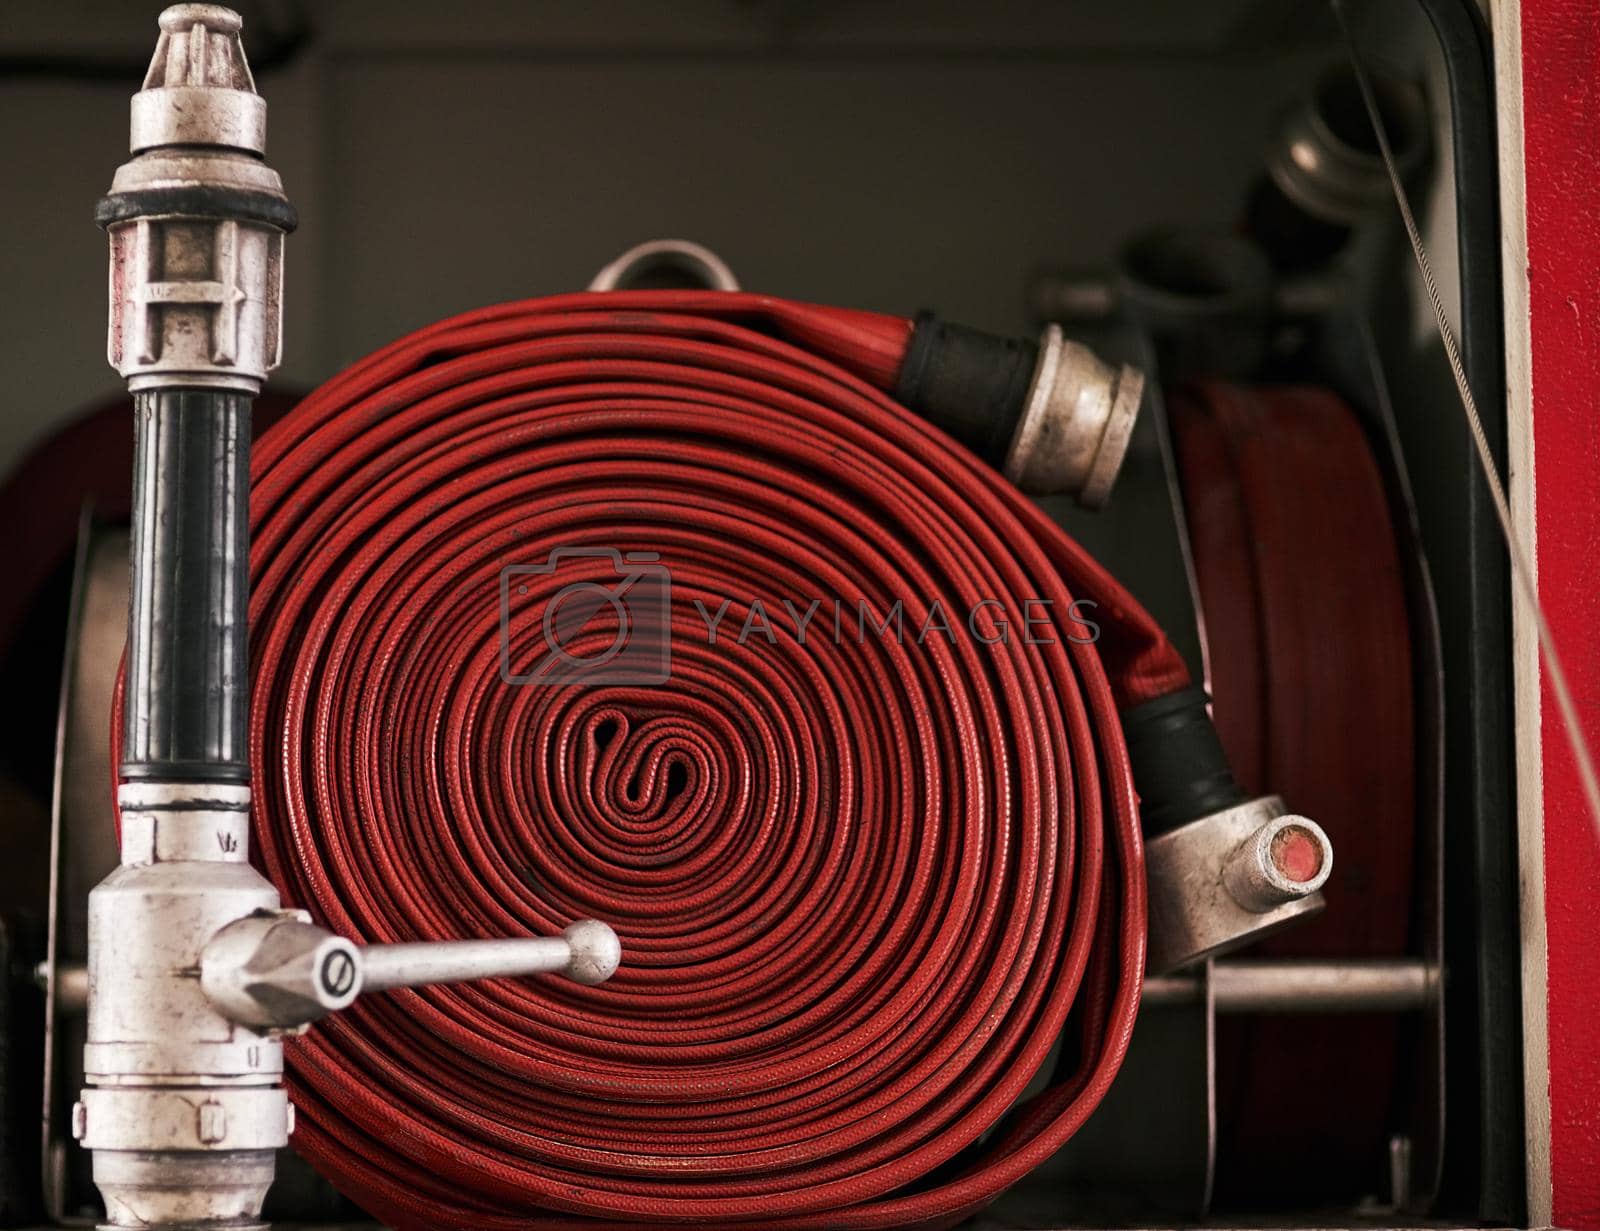 Royalty free image of Behind the scenes at the fire station. Cropped shot of a coiled fire hose. by YuriArcurs